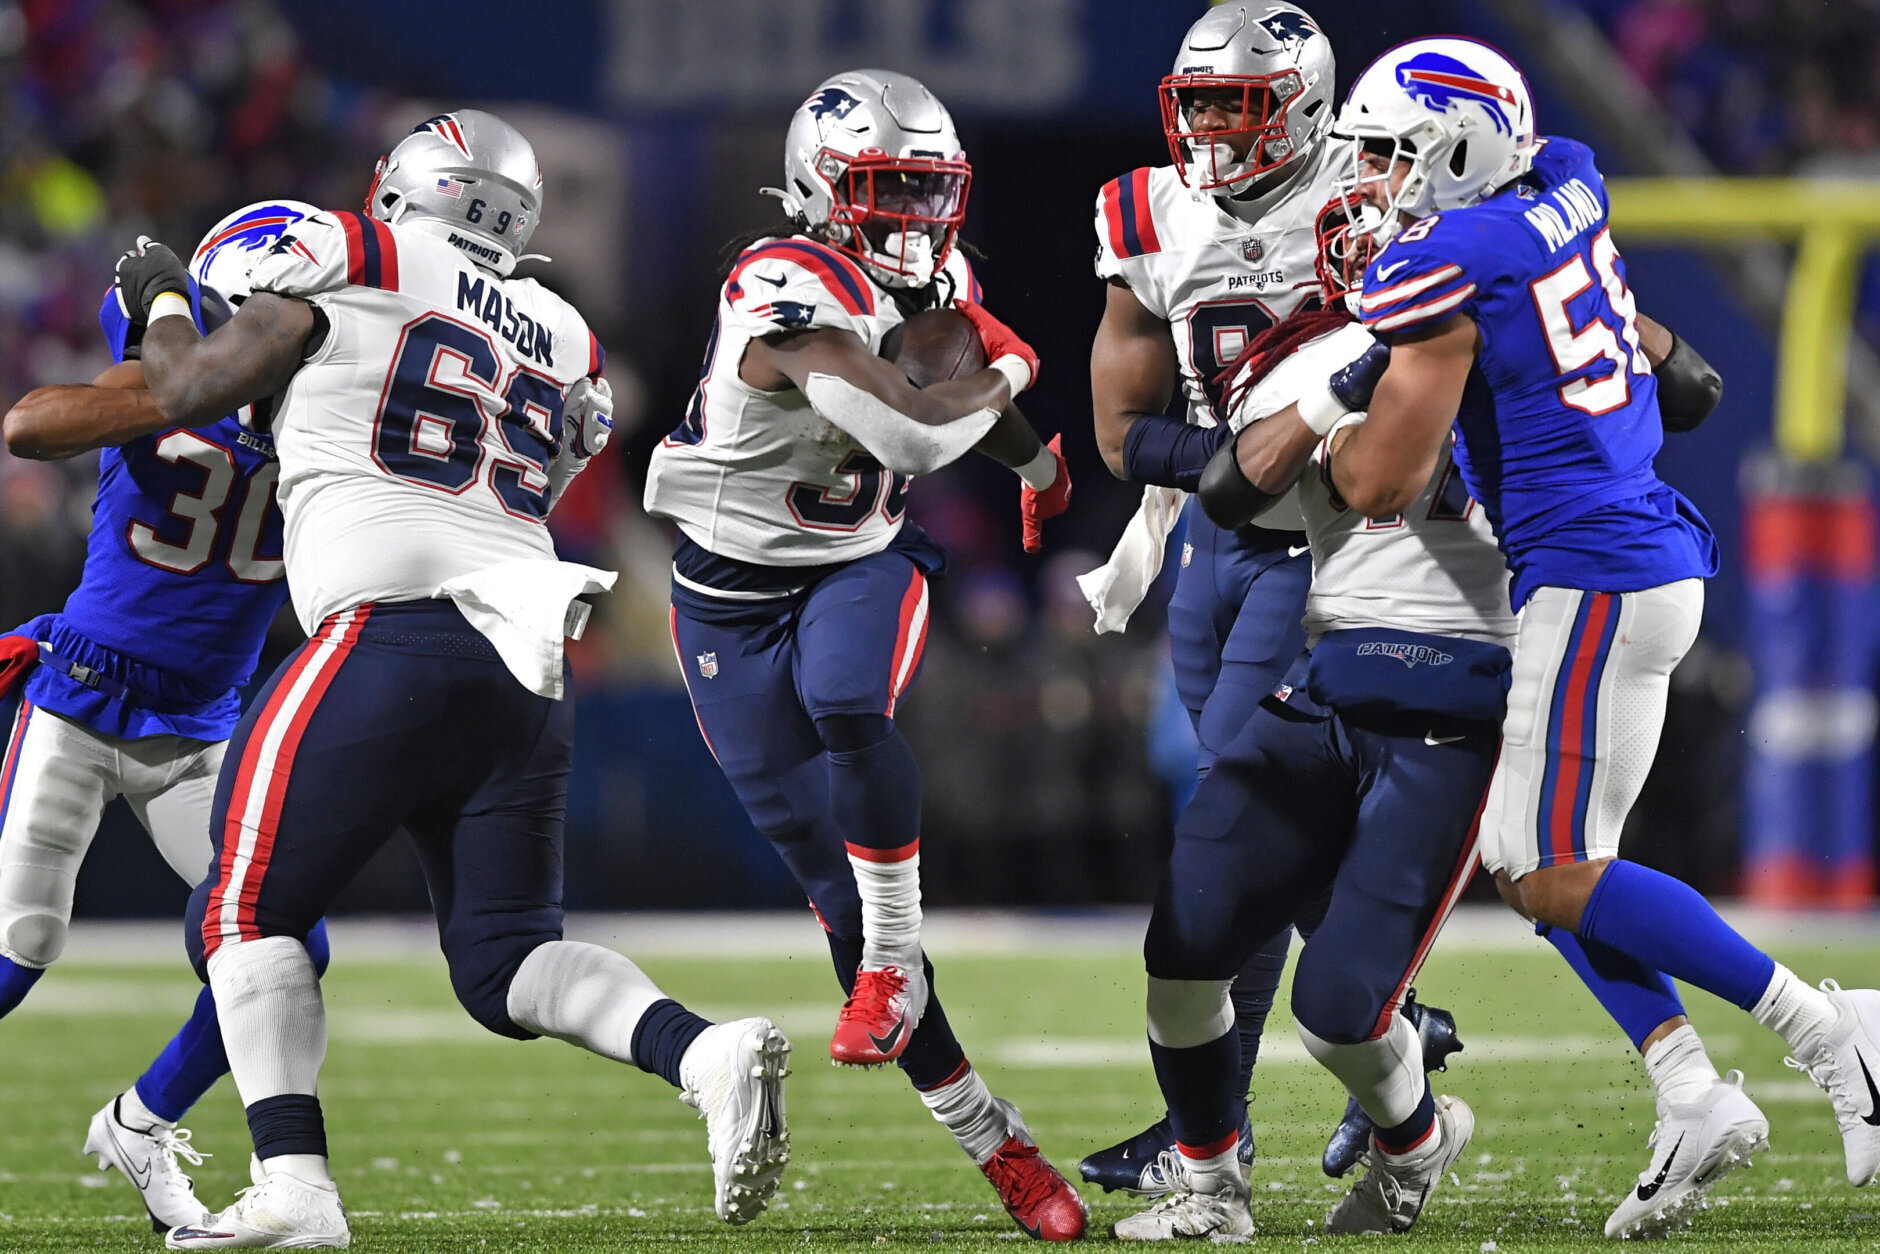 <p><em><strong>Patriots 14</strong></em><br />
<em><strong>Bills 10</strong></em></p>
<p>In gale force winds, Bill Belichick basically went to his Navy roots by attempting just three passes (3!), including <a href="https://twitter.com/ESPNStatsInfo/status/1468047583310405633?s=20" target="_blank" rel="noopener">a historic ONE pass in the first half</a>. The road to the Super Bowl just might have to come through Foxborough (again &#8230; eye roll) and visions of a Belichick vs. Brady Super Bowl have to be dancing in the league&#8217;s heads.</p>
